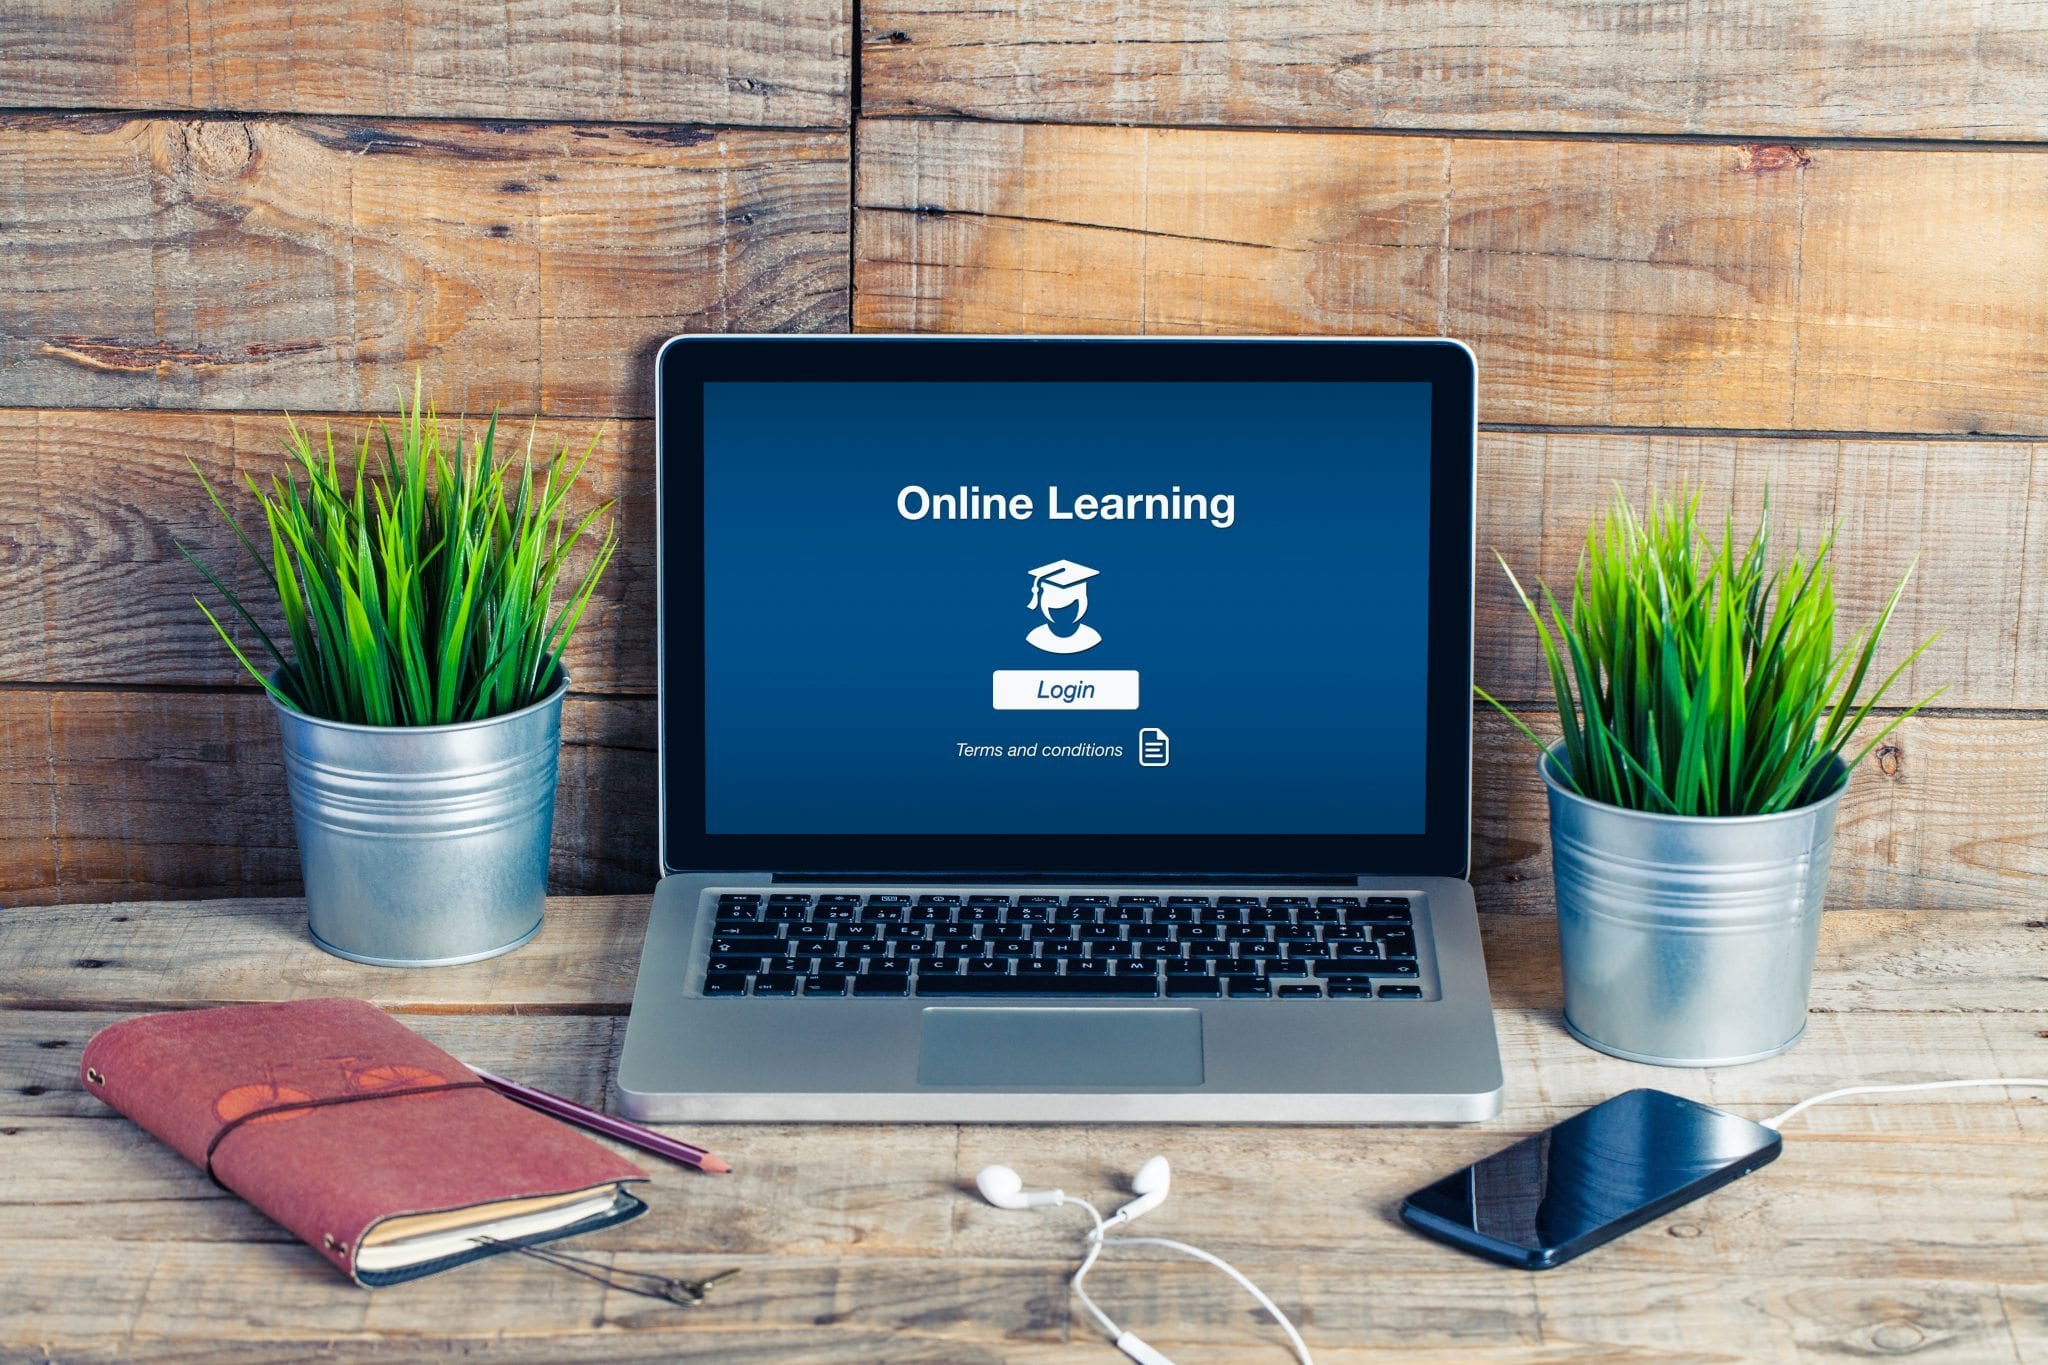 Blog post image pertaining to 5 eLearning Trends to Watch for in 2017